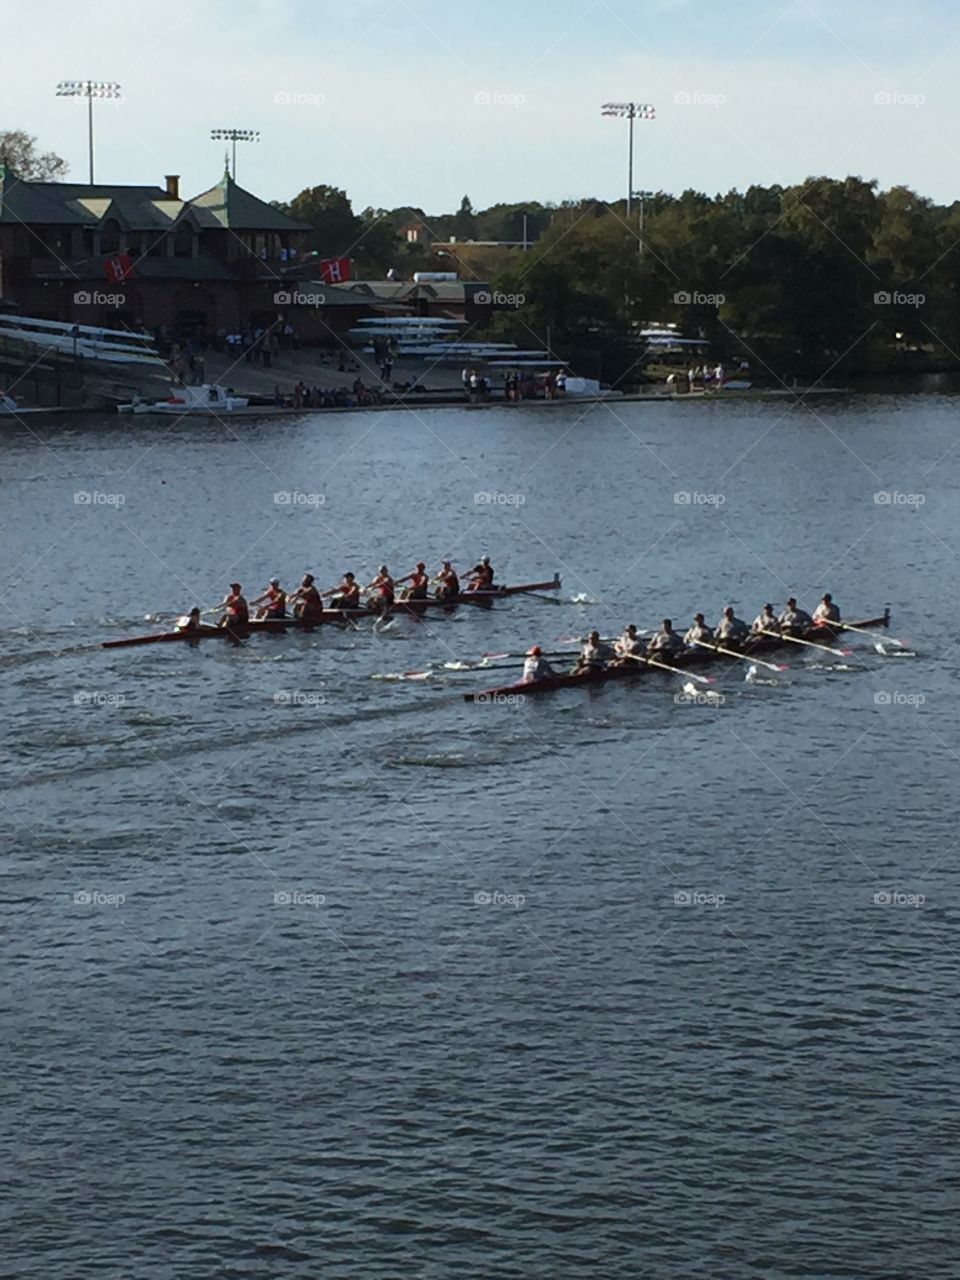 Head of the Charles rowing race